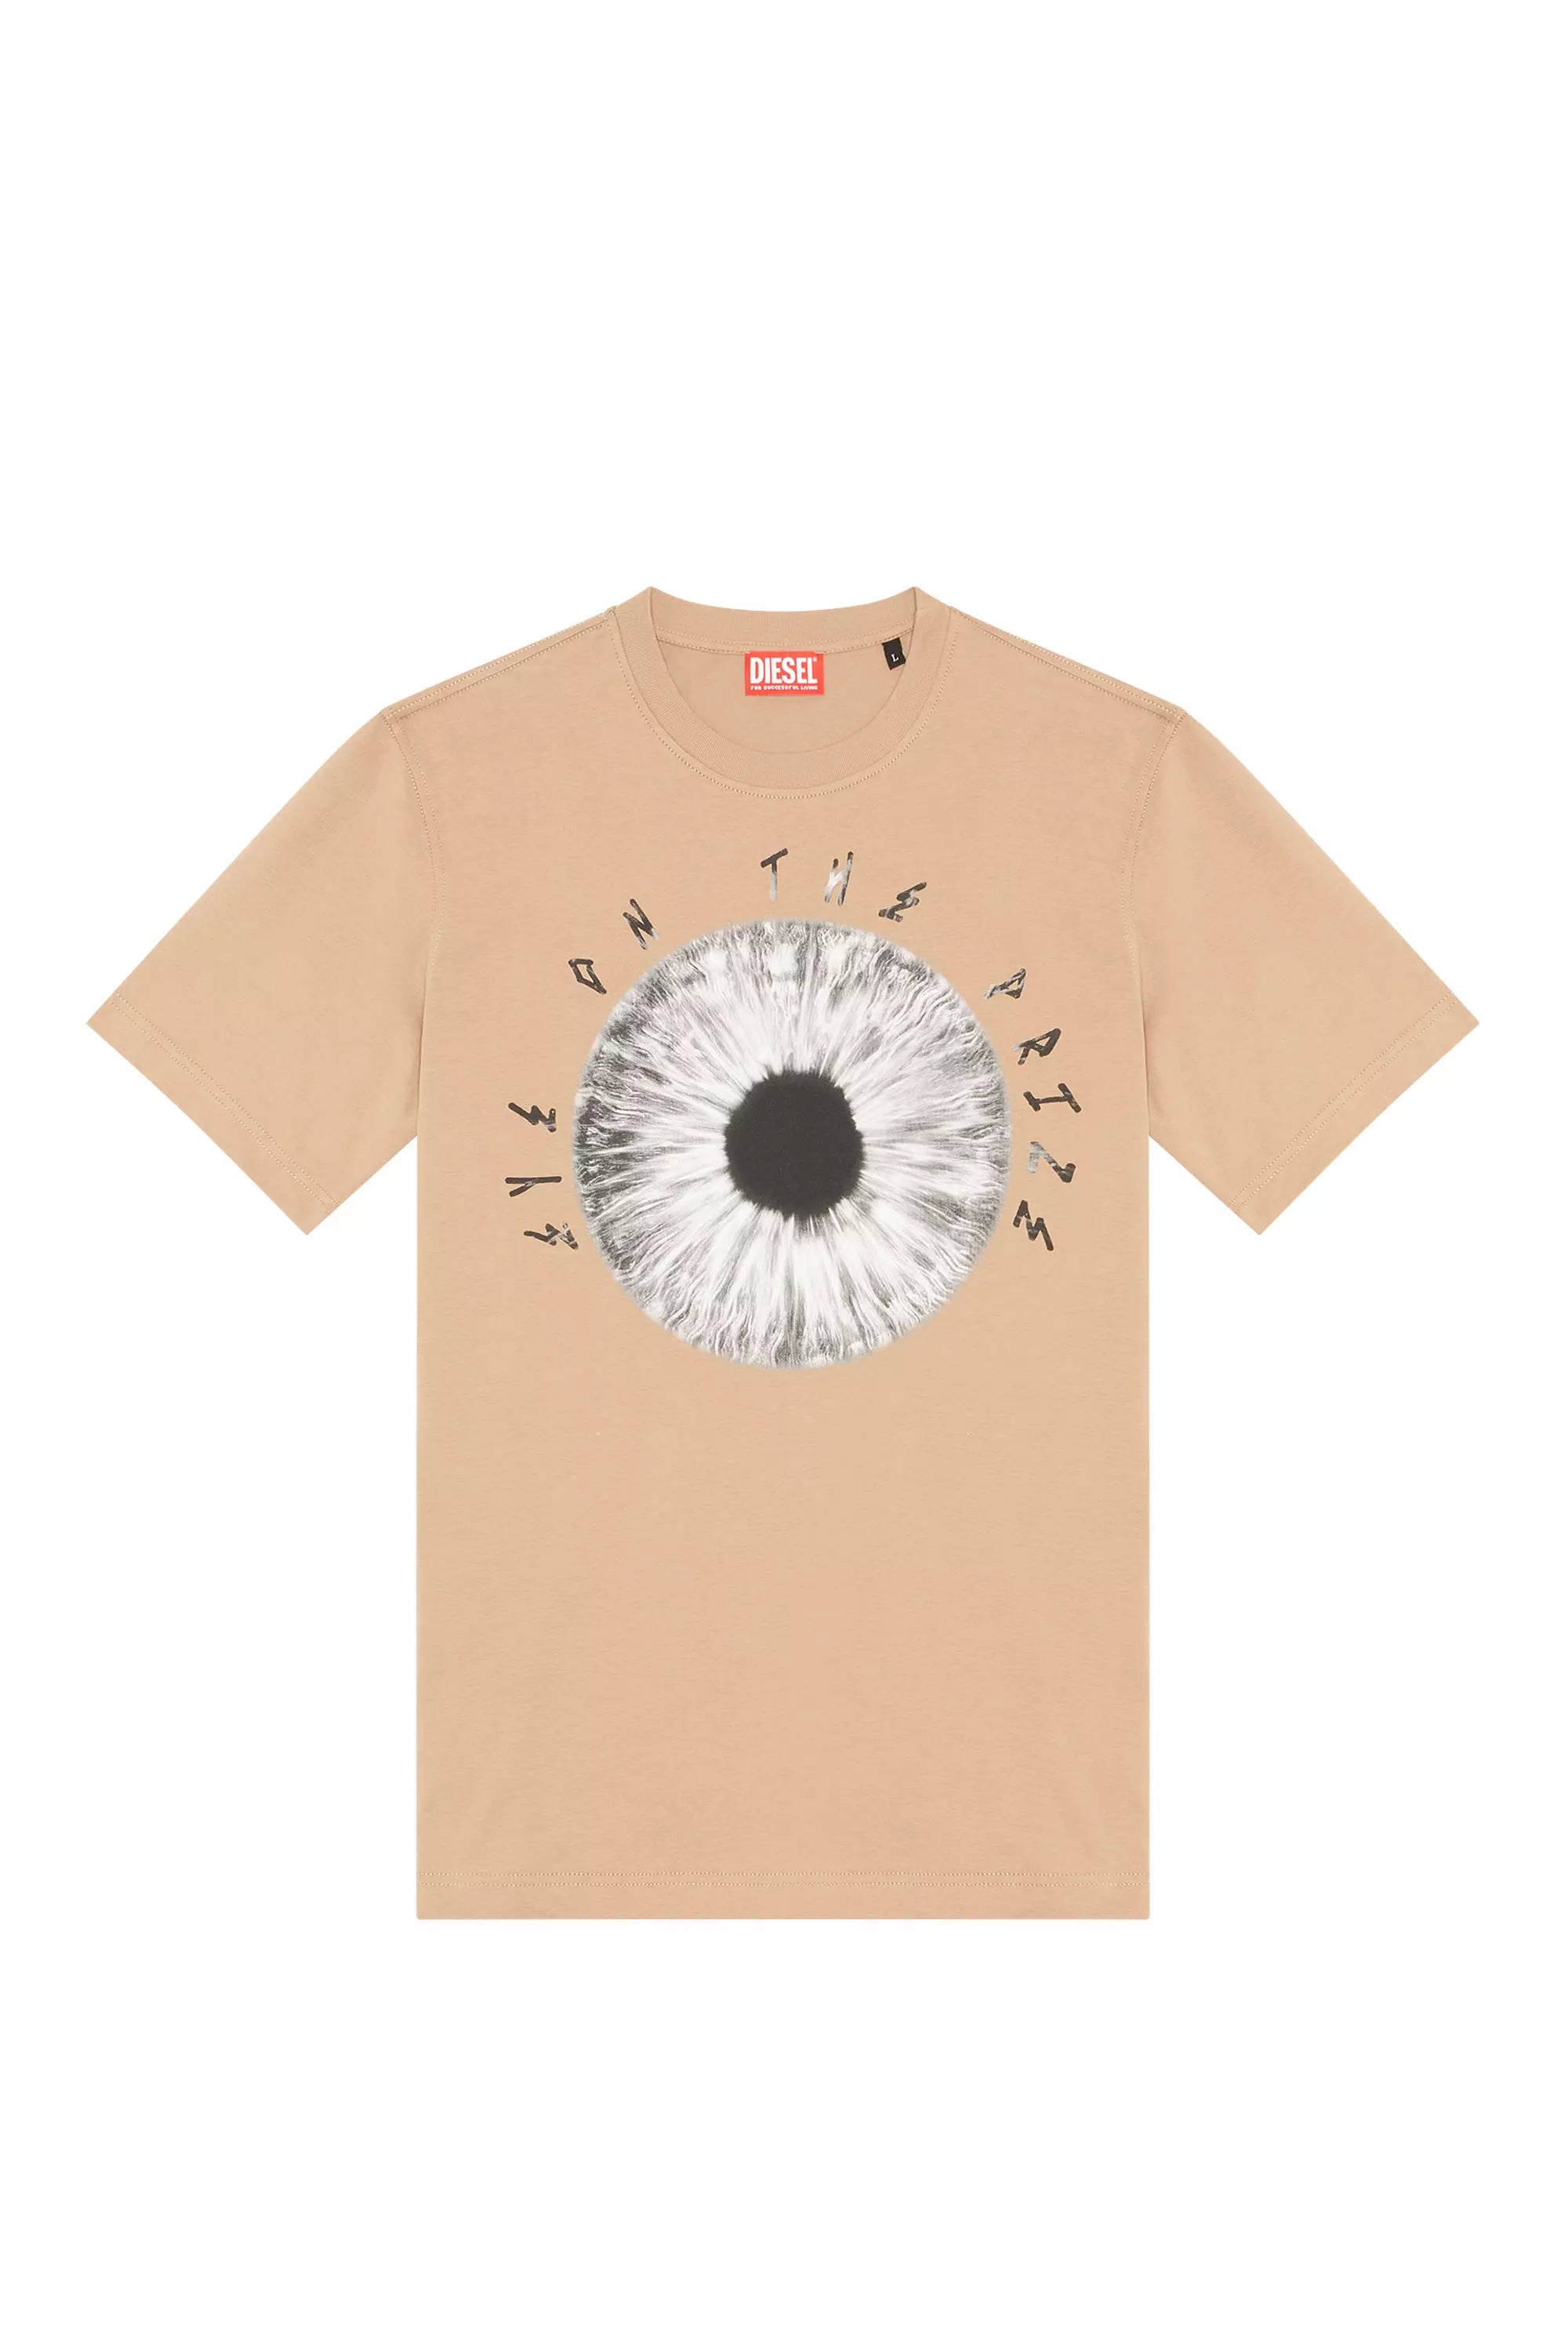 Diesel T-Just T-Shirt | Eye On The Prize